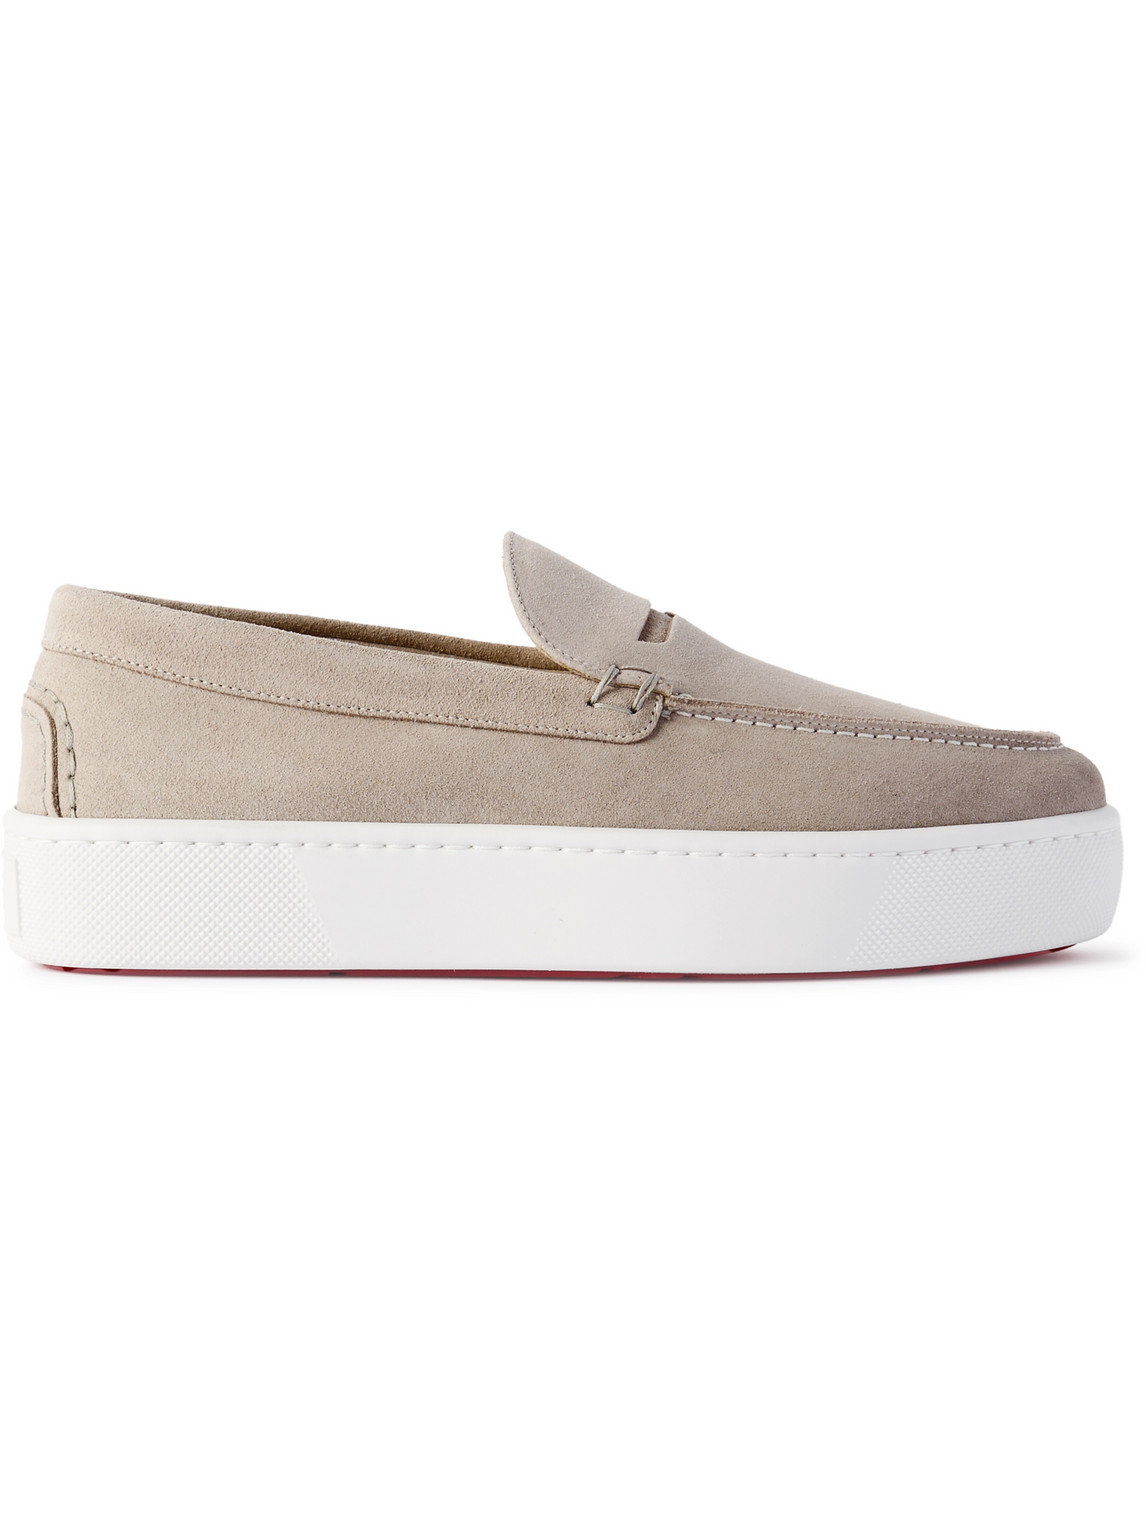 Christian Louboutin Paqueboat Suede Penny Loafers In Neutrals